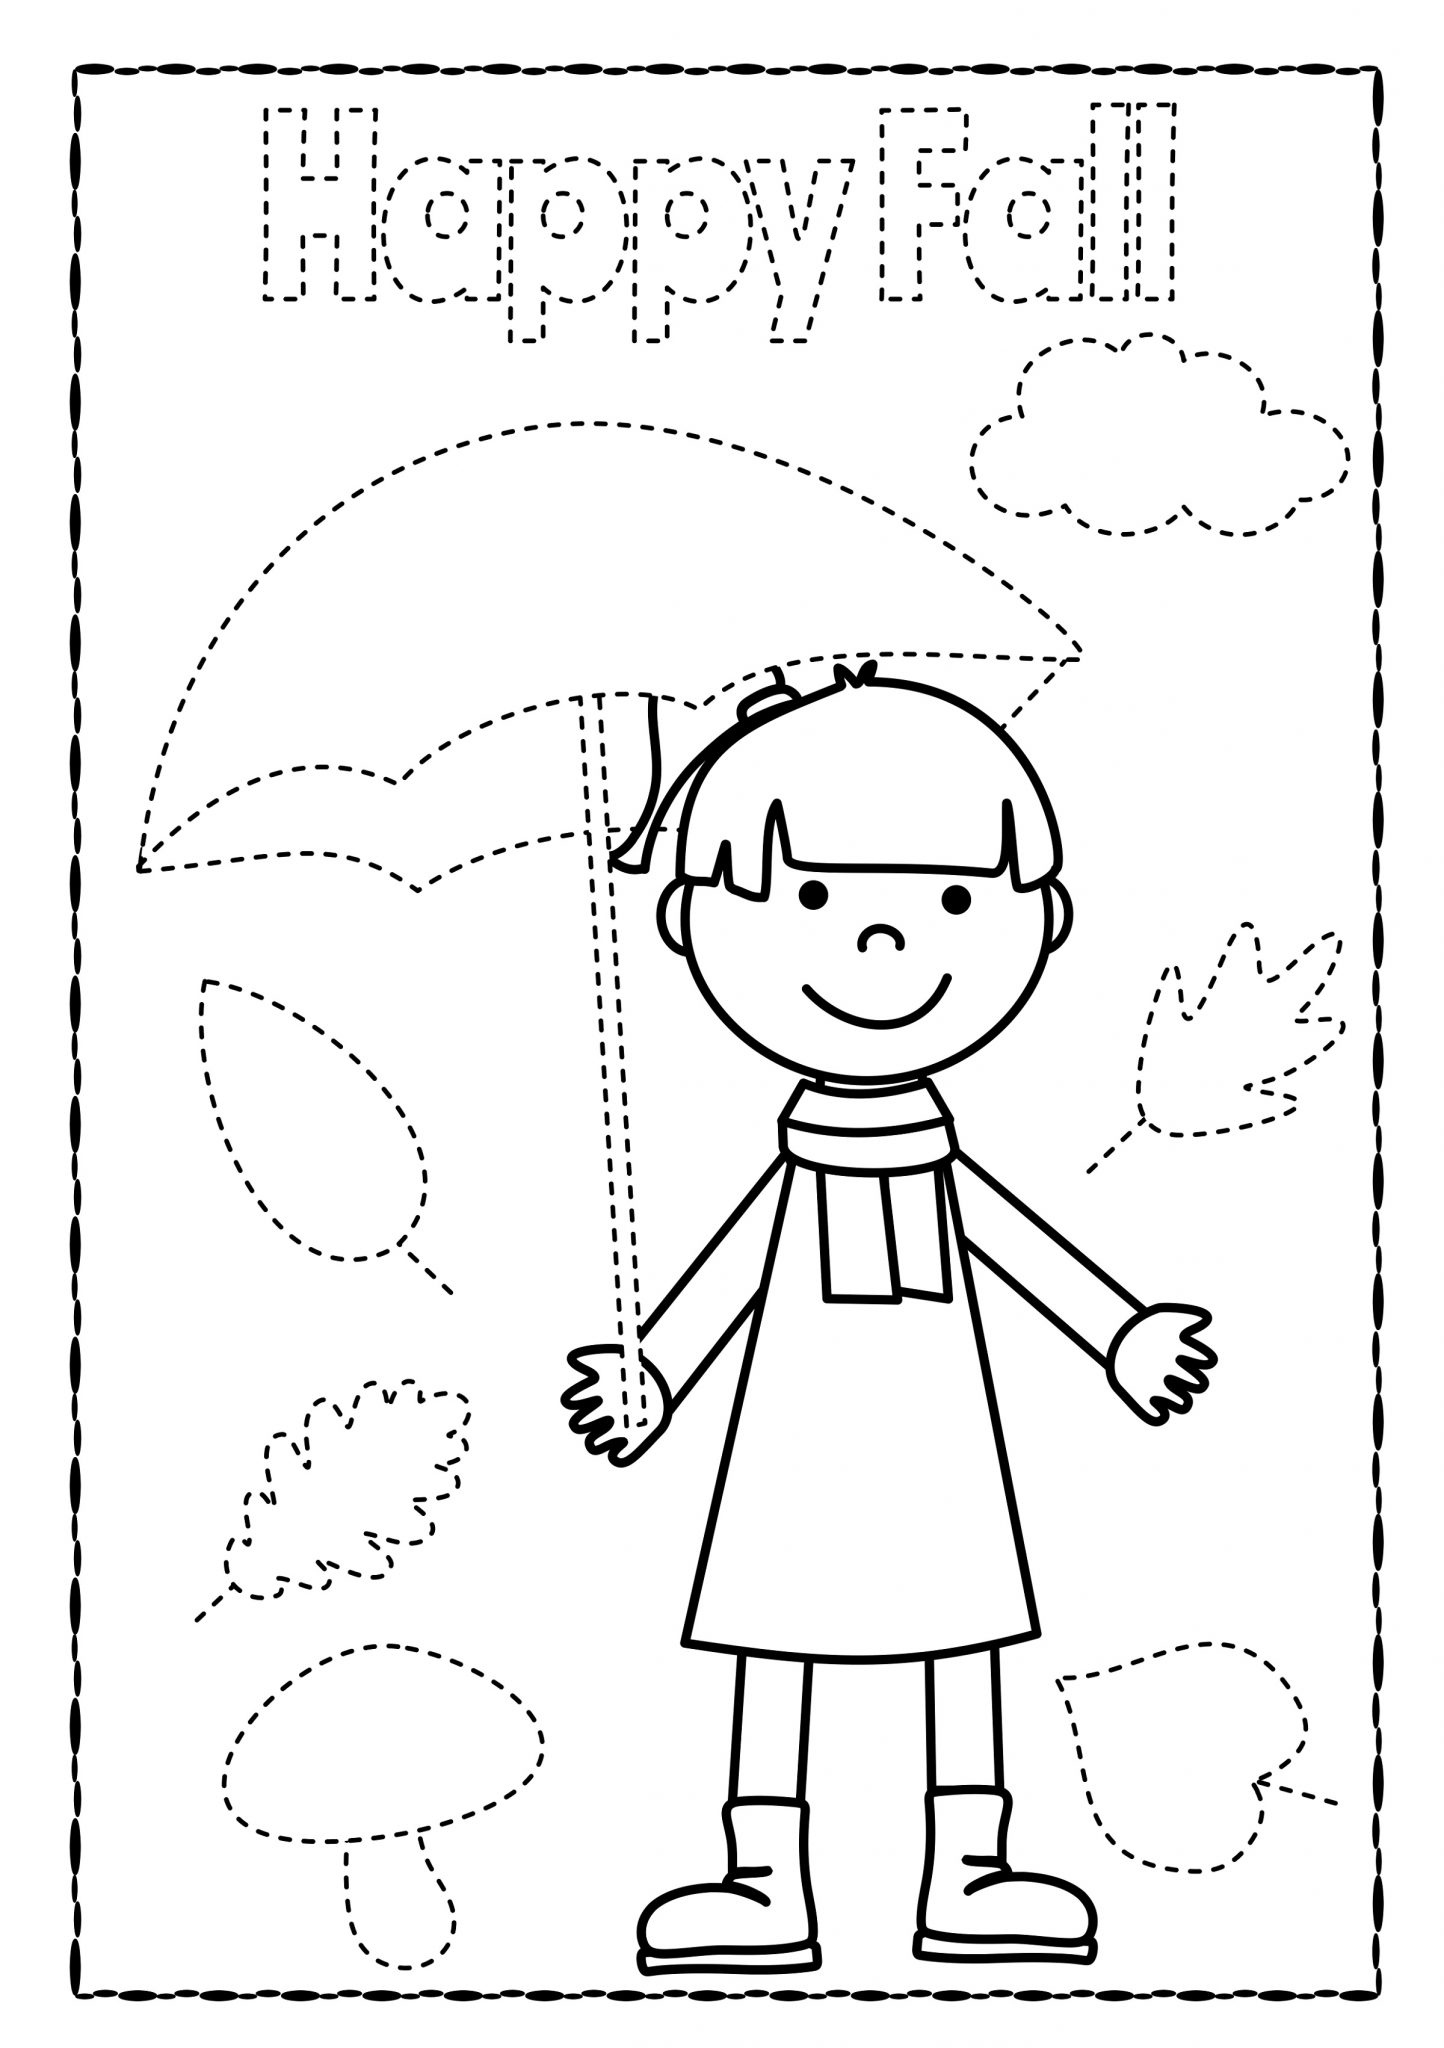 free-printable-letter-tracing-worksheets-for-preschoolers-letter-tracing-worksheets